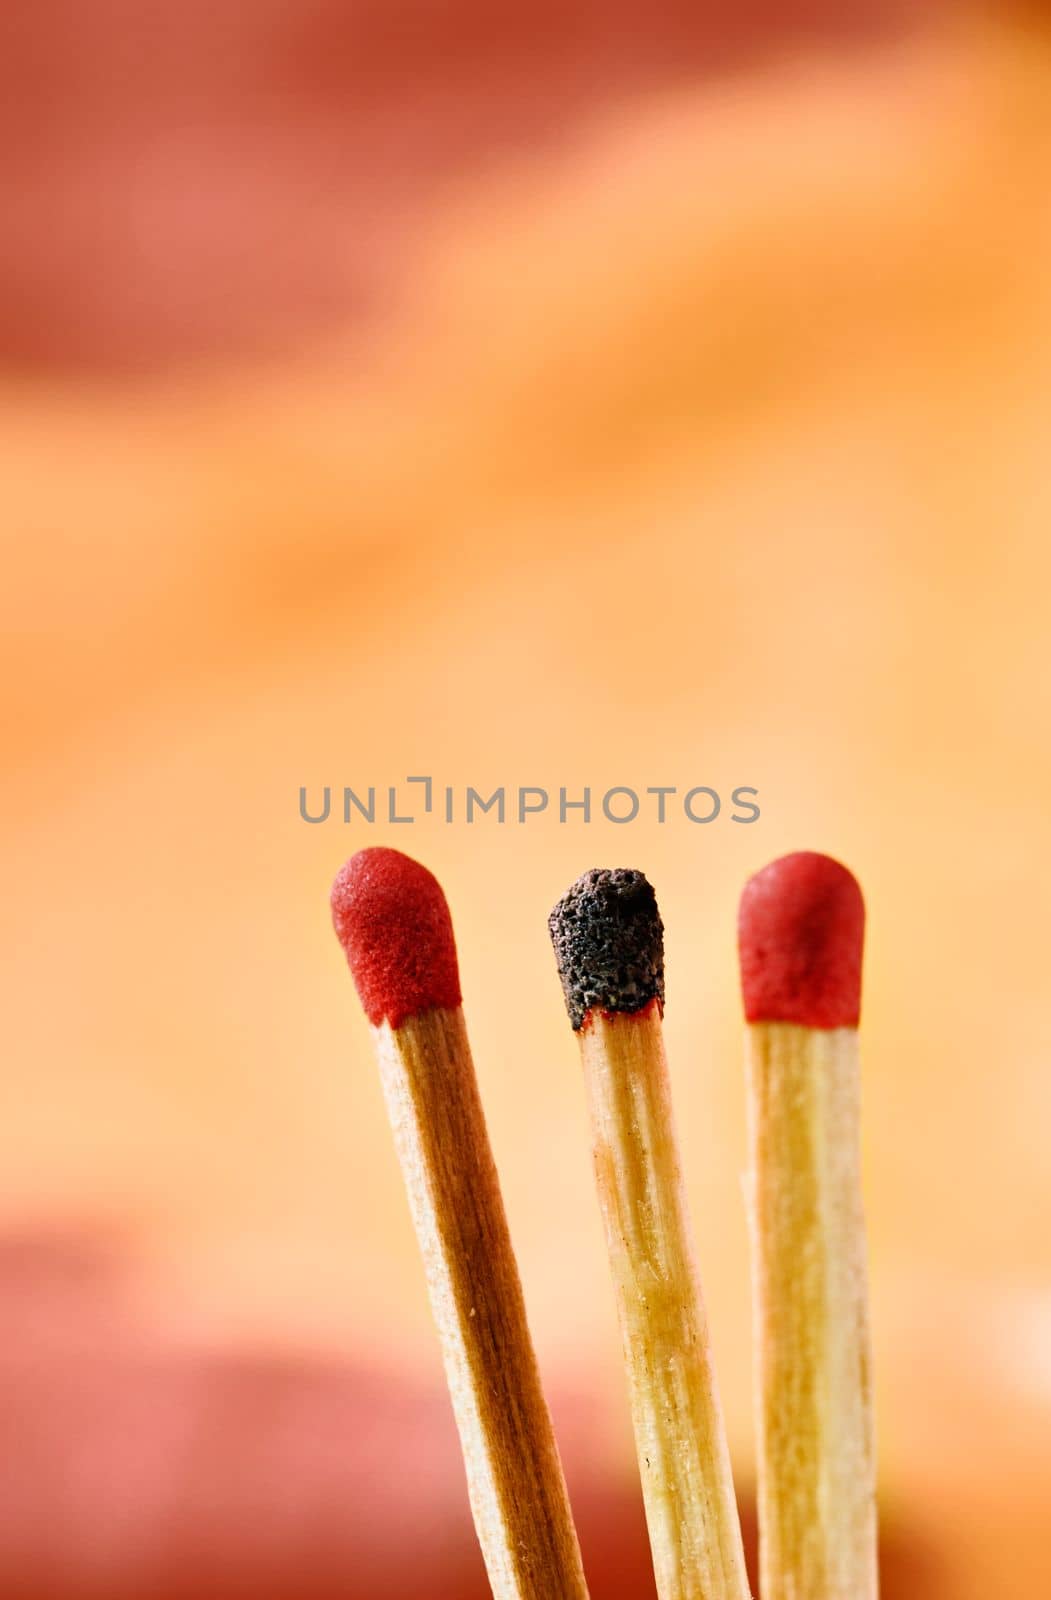 Red matches and one burnt match on colored background